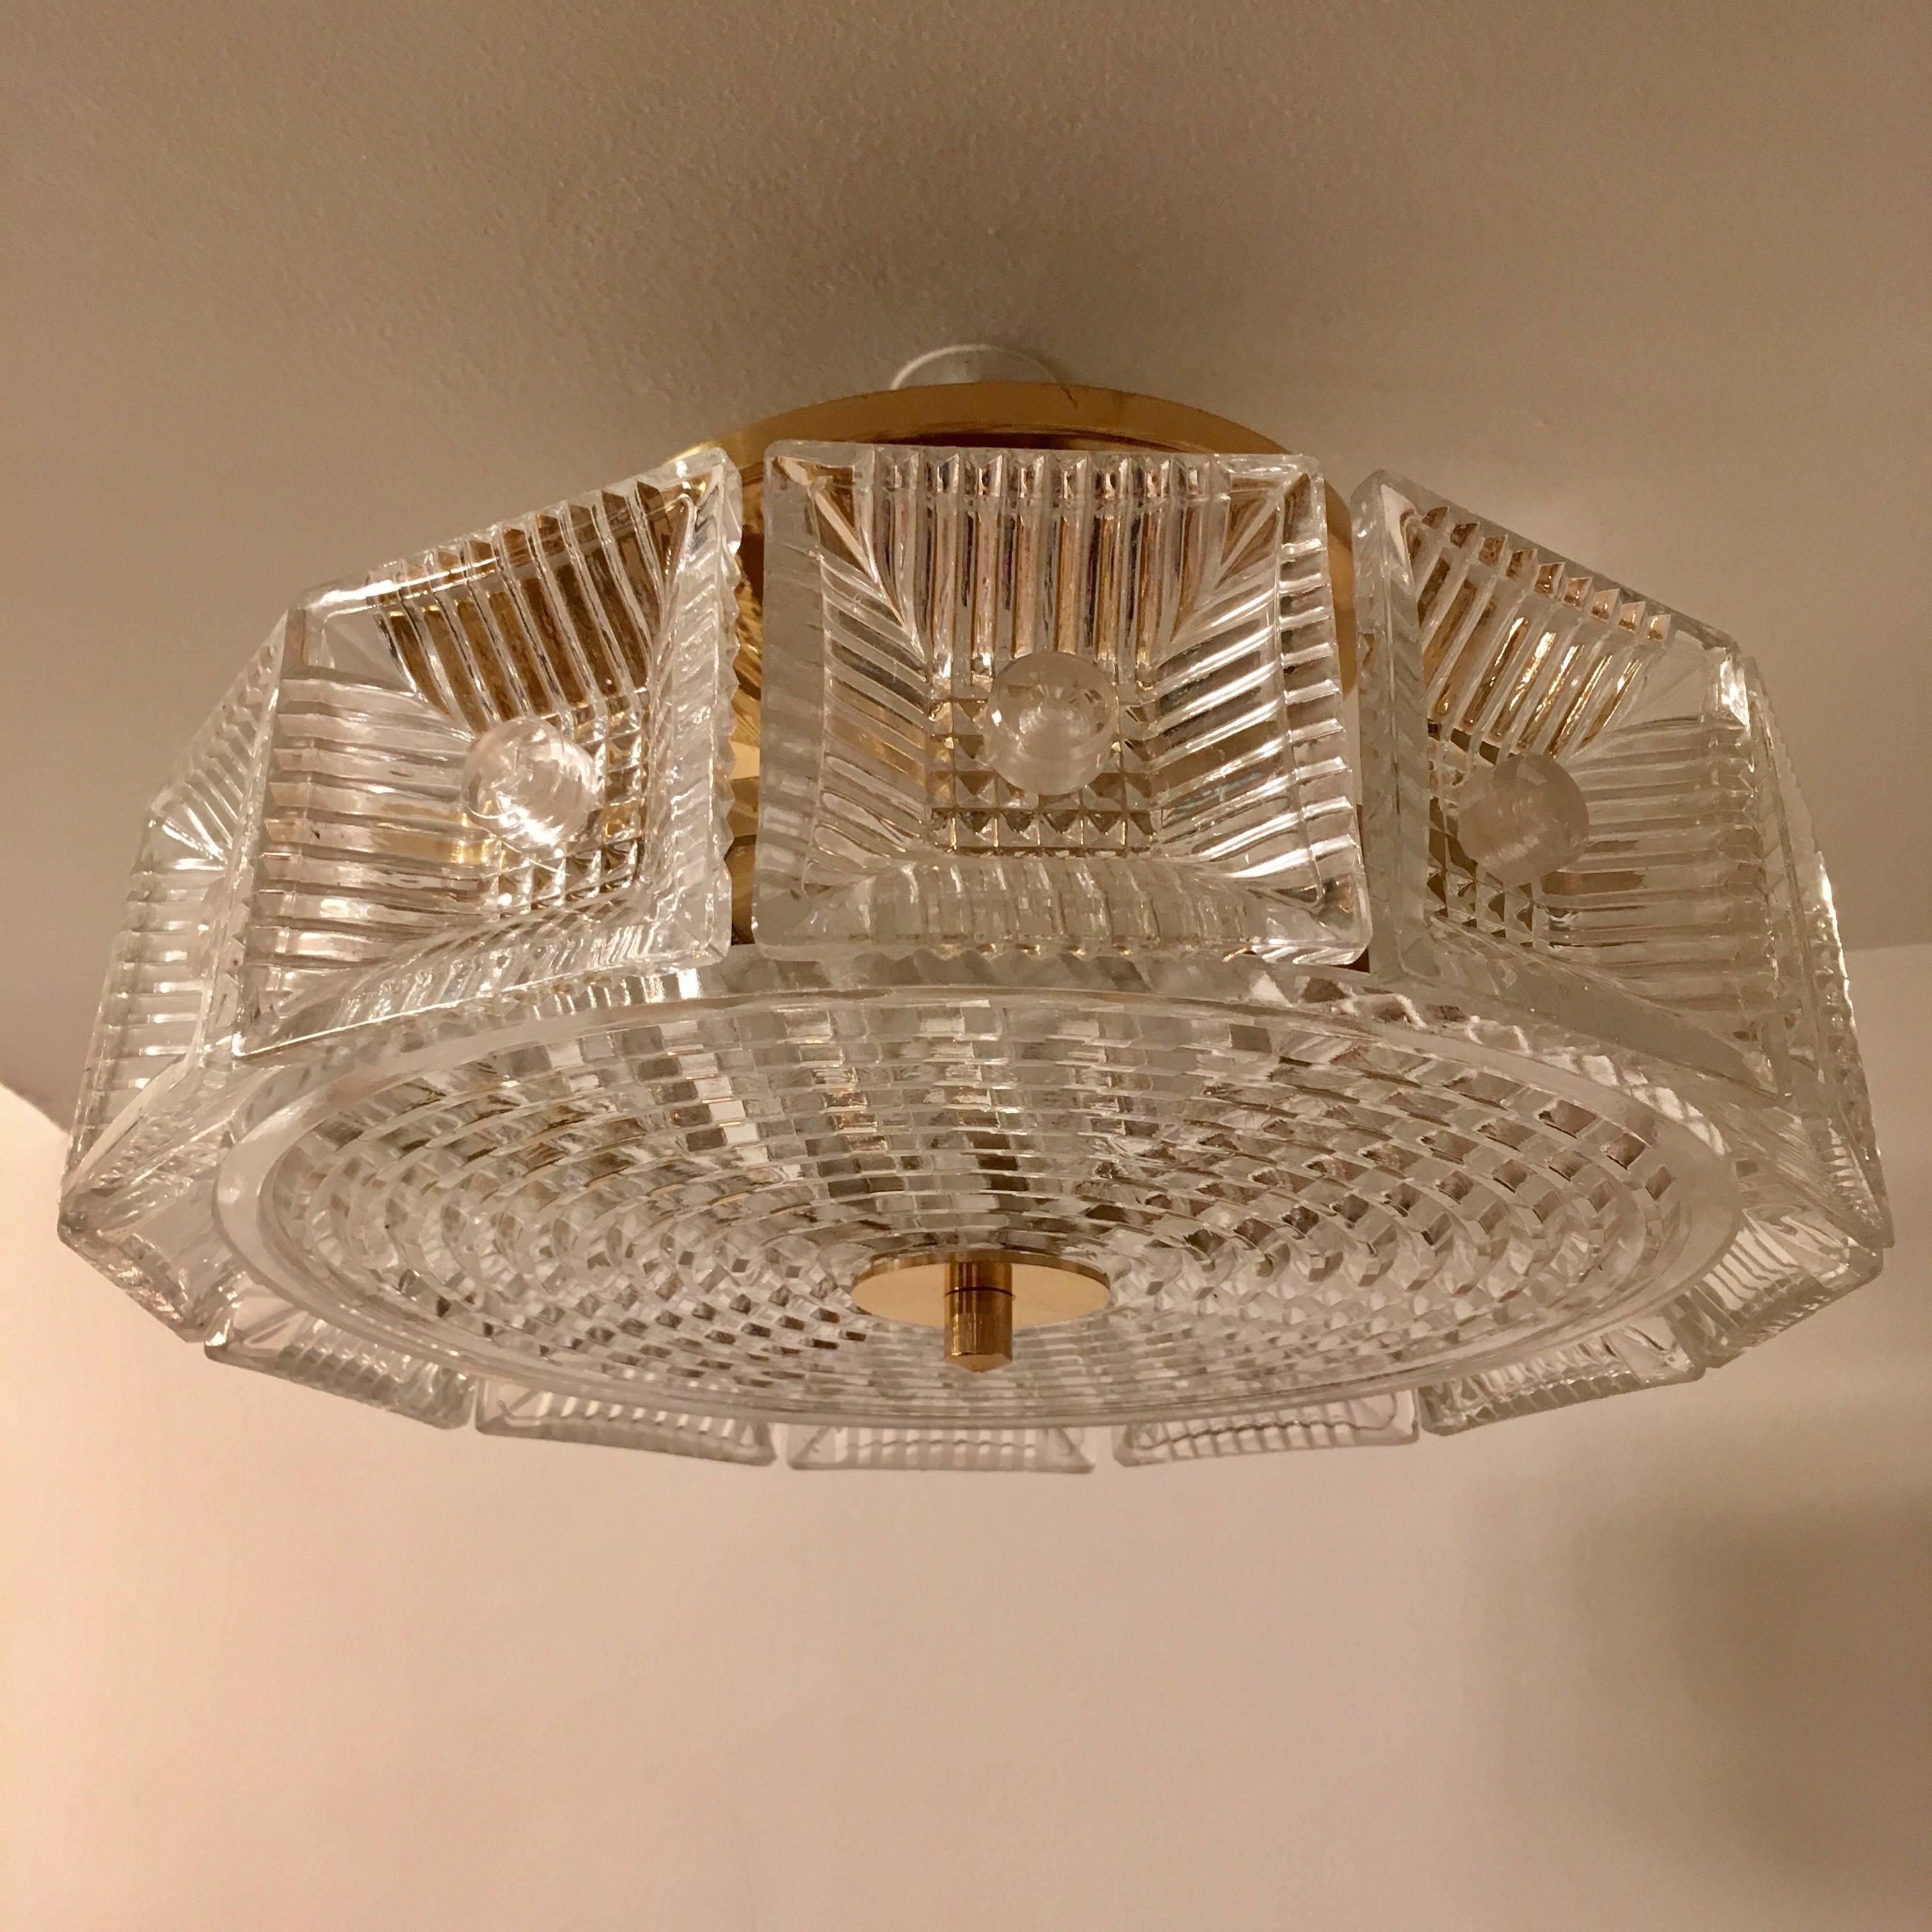 An original thick heavy chunky crystal flush pendant or hanging chandelier with golden brass fittings made by the famed Swedish crystal maker, Orrefors. Newly rewired.
Located in our New York City Chelsea location.